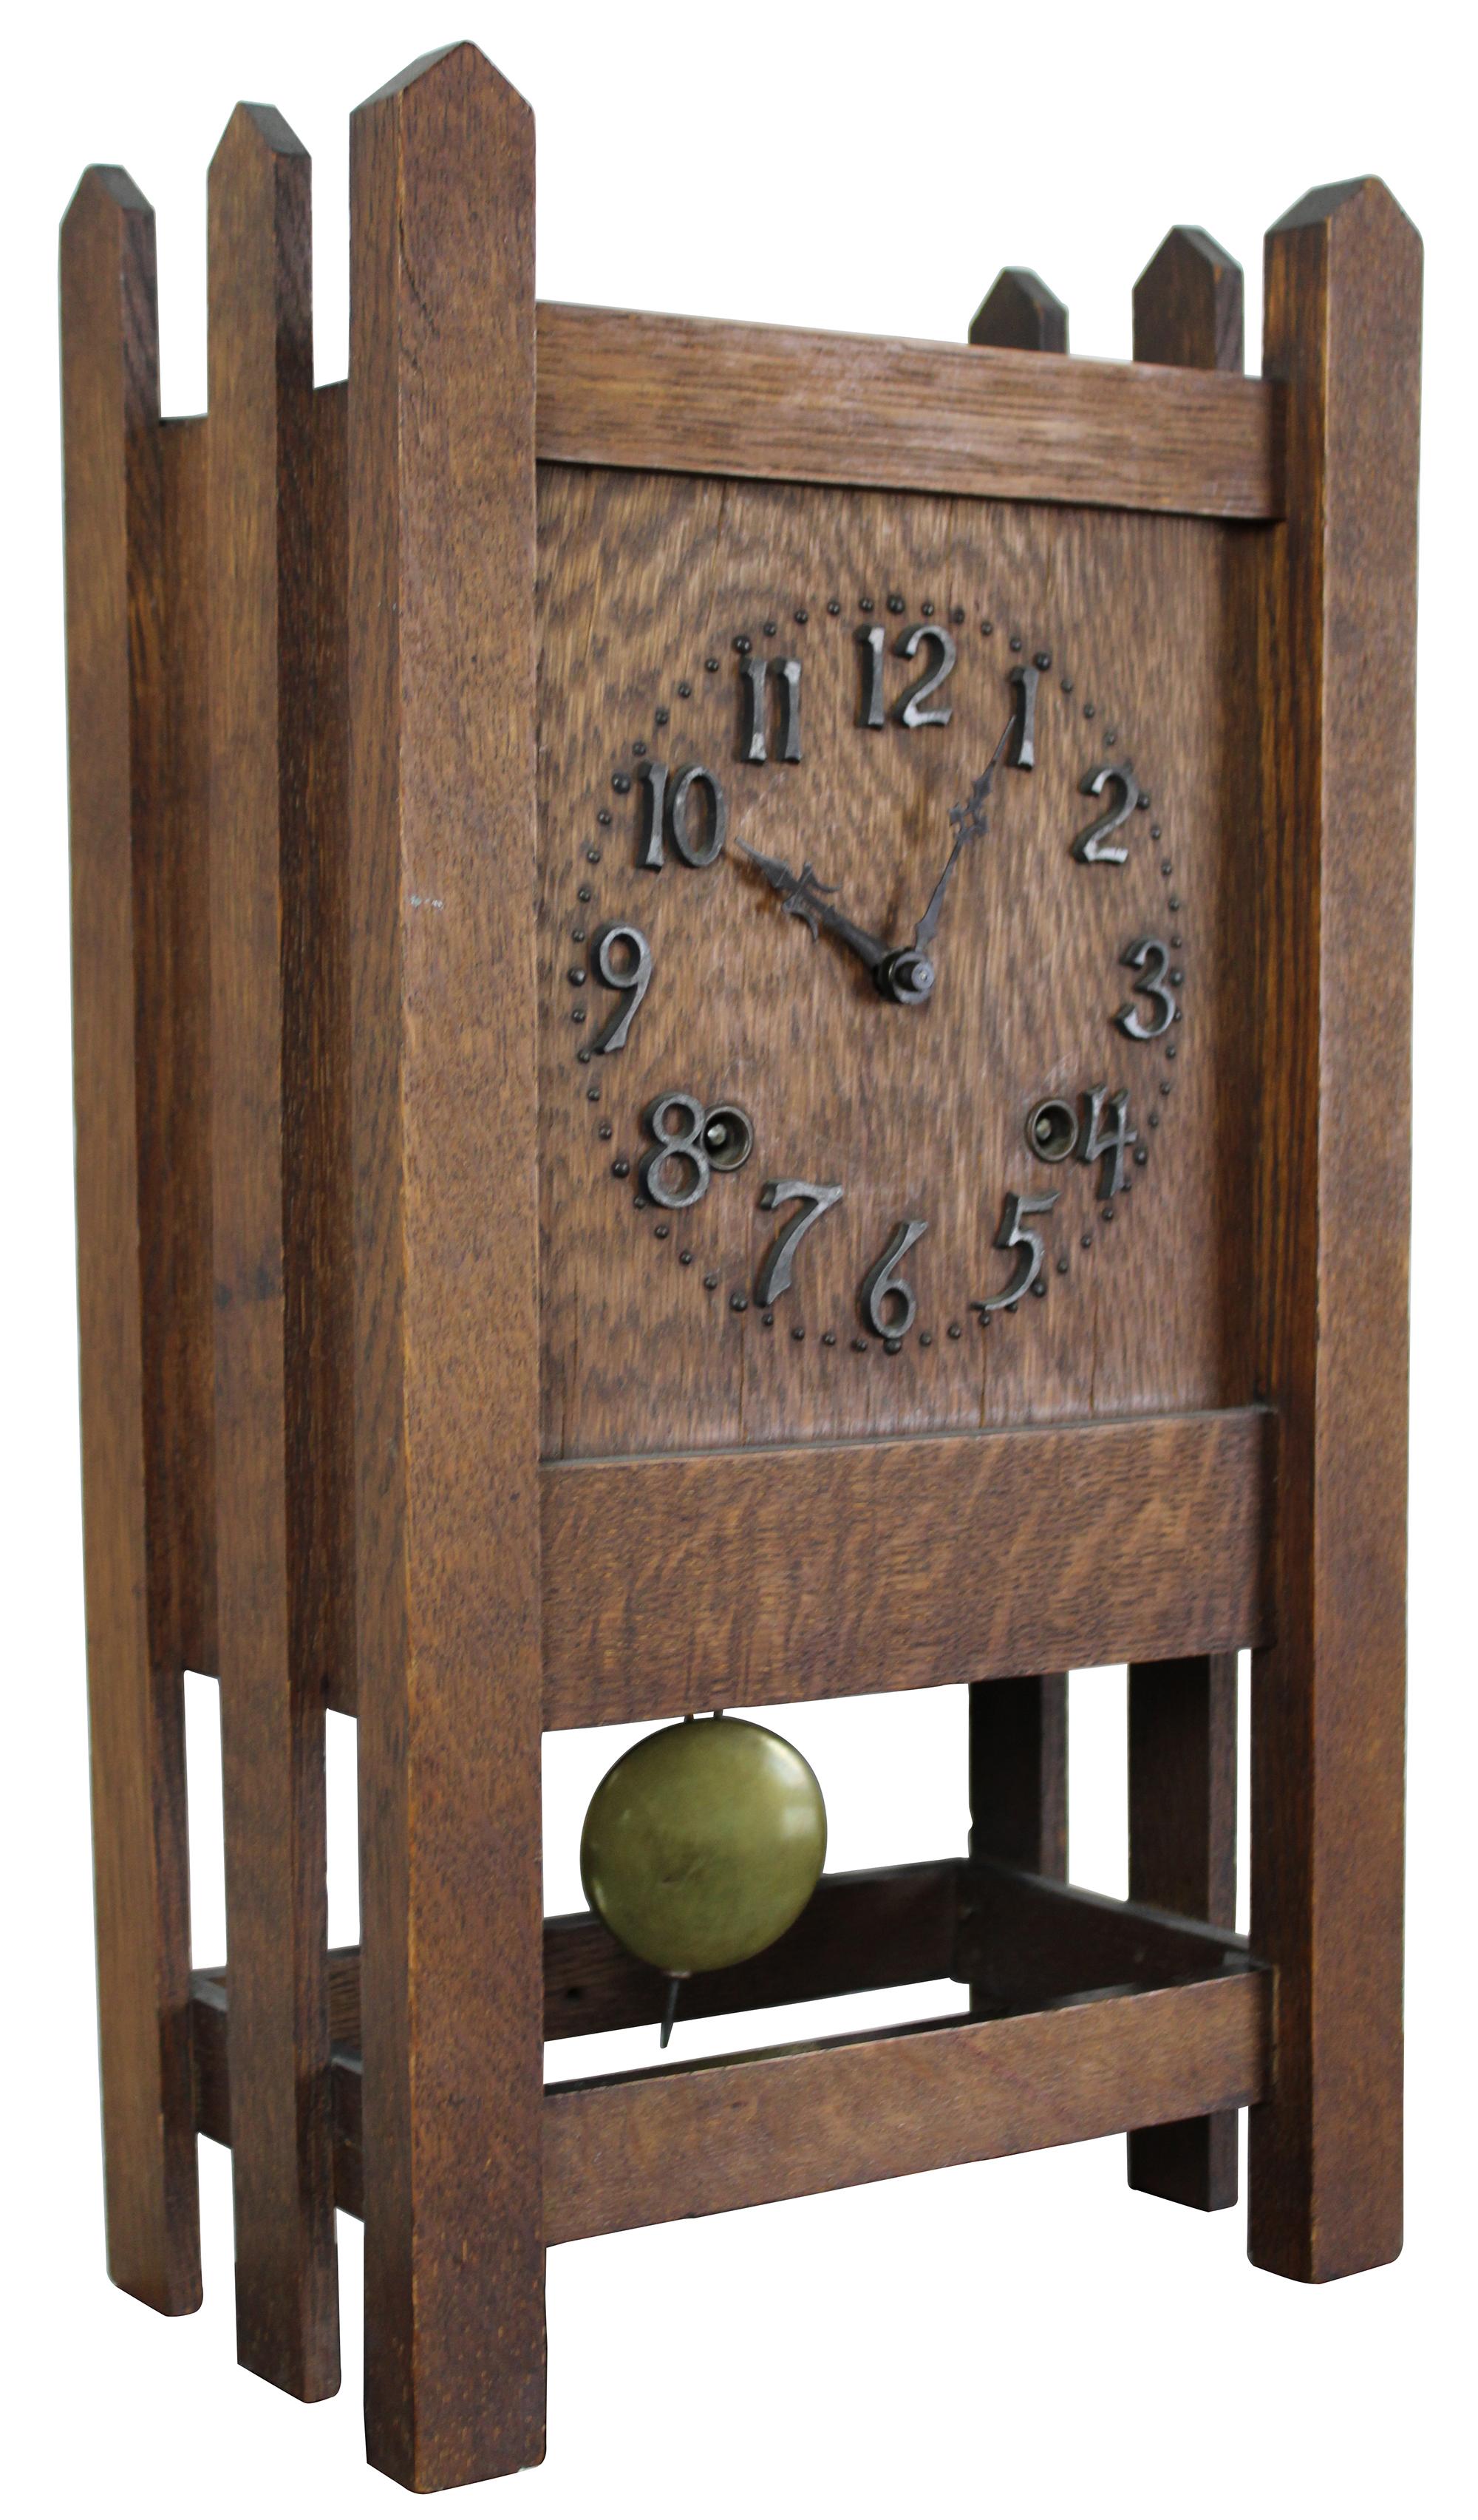 A beautiful mission era 8 day clock by Session Clock Company of Forestville, Connecticut. Made from quartersawn oak with iron mounted numbers and a unique fence post design. Measure: 14